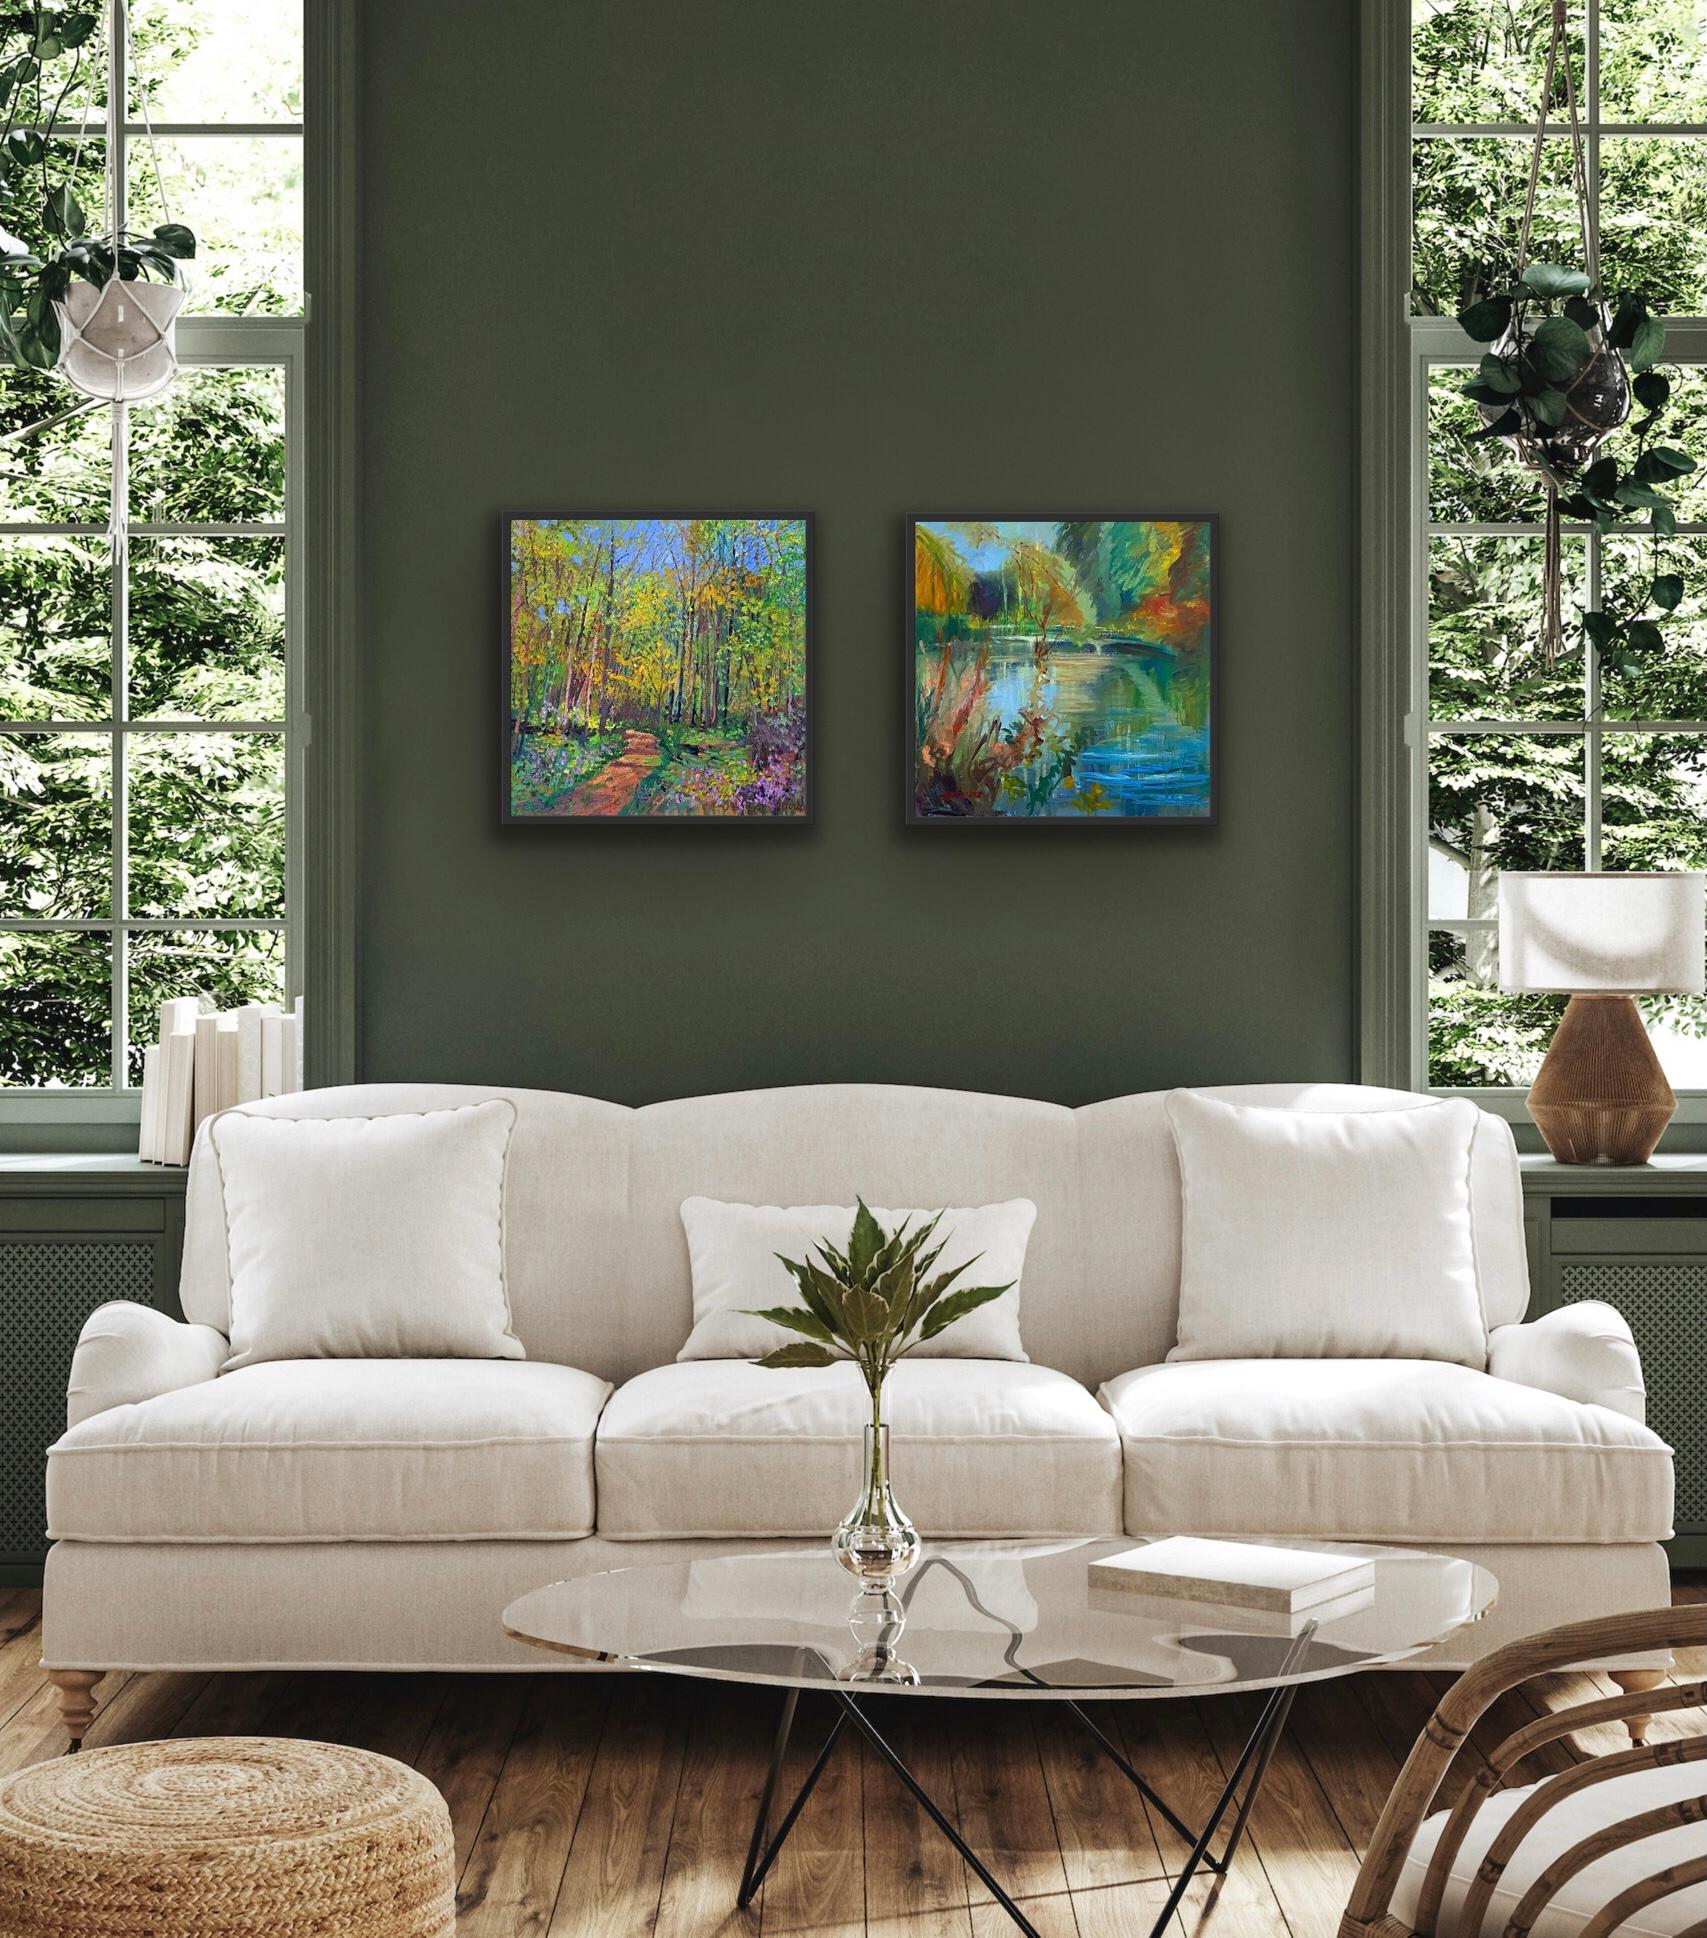 Spring is in the air and The Pond Turning to Autumn diptych - Impressionist Painting by Lynda Minter